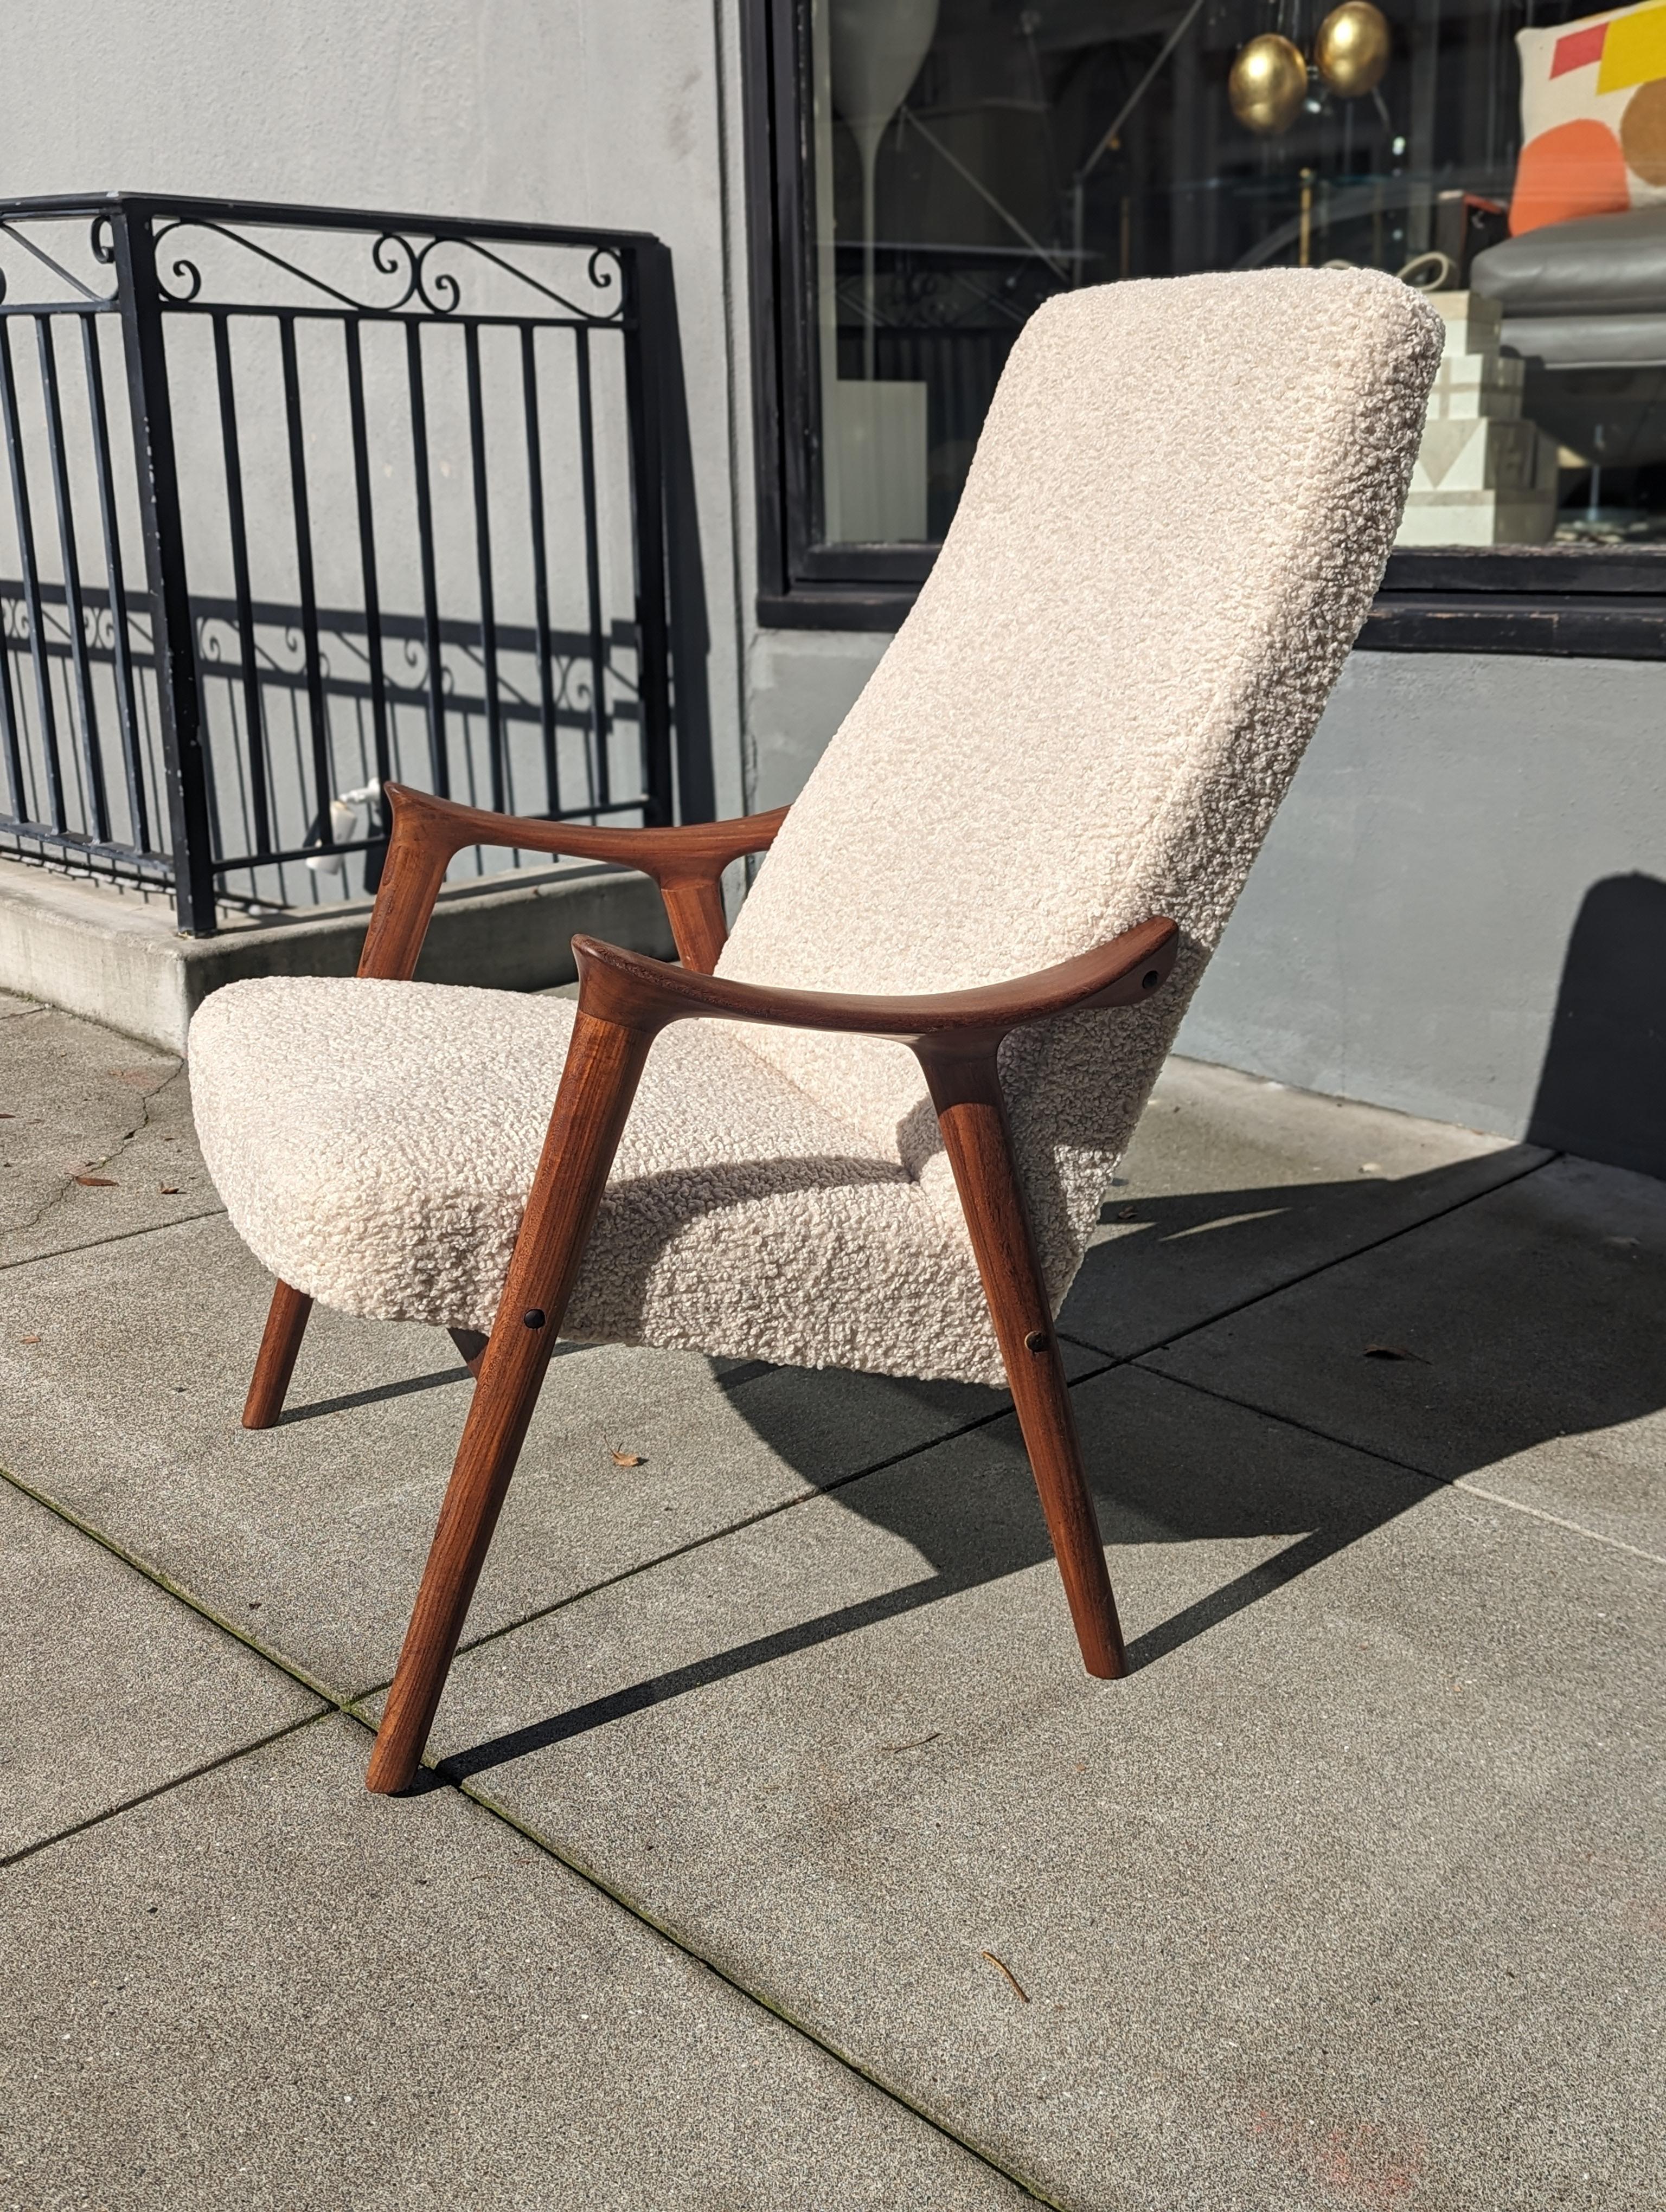 Forget stiff sofas and cookie-cutter chairs! This 1970s Westnofa lounge chair is an invitation to curl up and embrace the iconic scoop, Scandinavian style. Picture the sun-drenched grain of the curved teak arms, whispering stories of Danish summers.